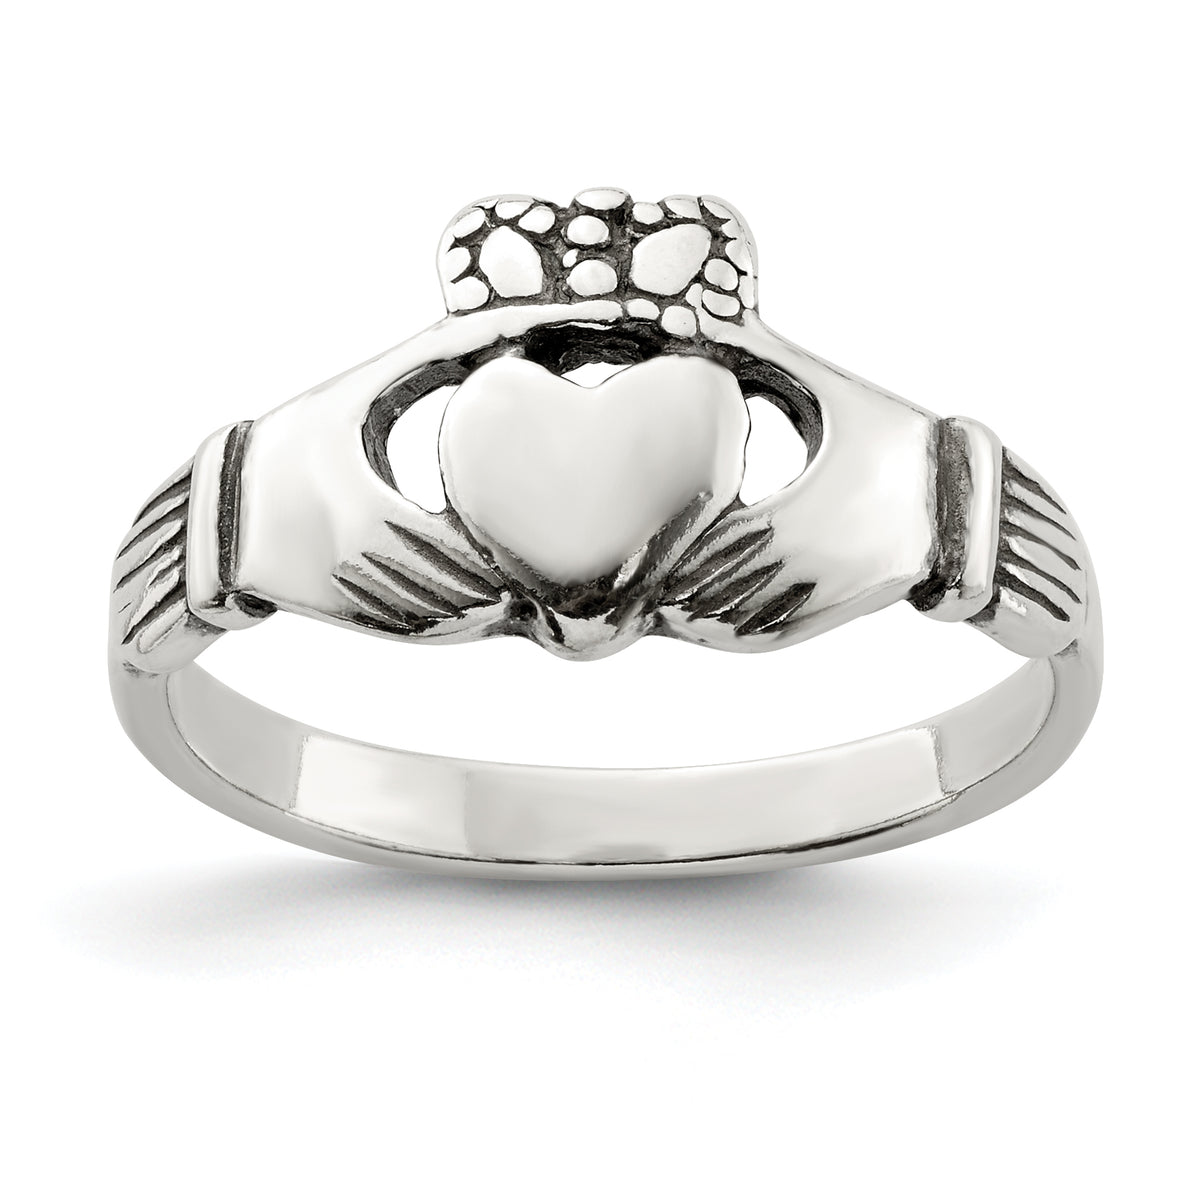 Sterling Silver Antiqued Claddagh Ring